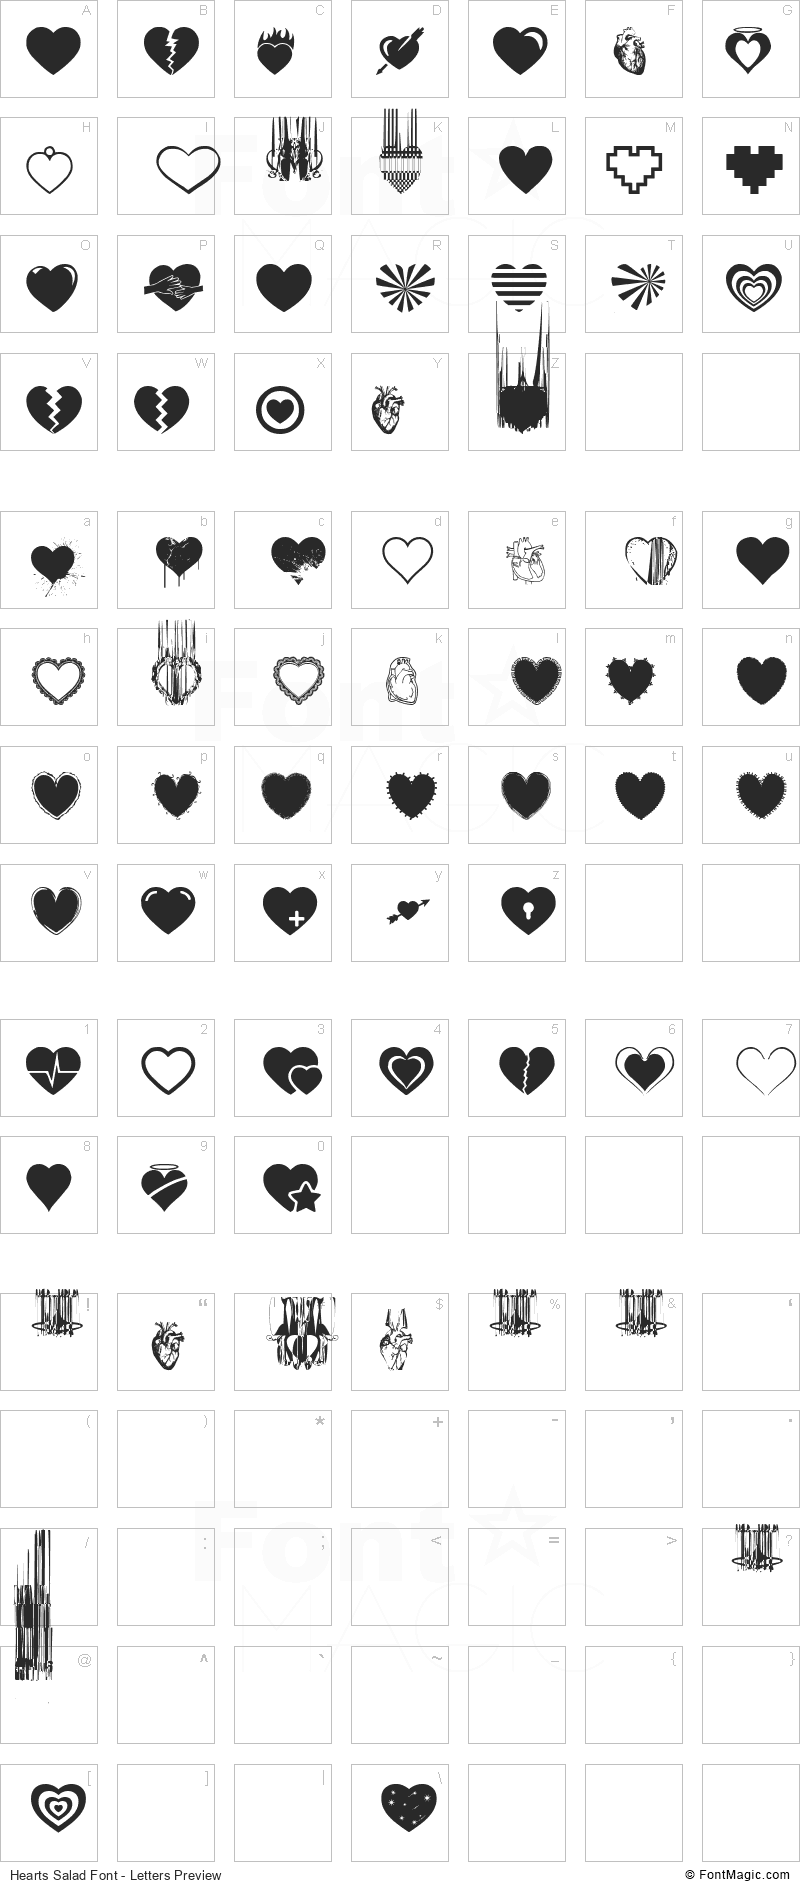 Hearts Salad Font - All Latters Preview Chart